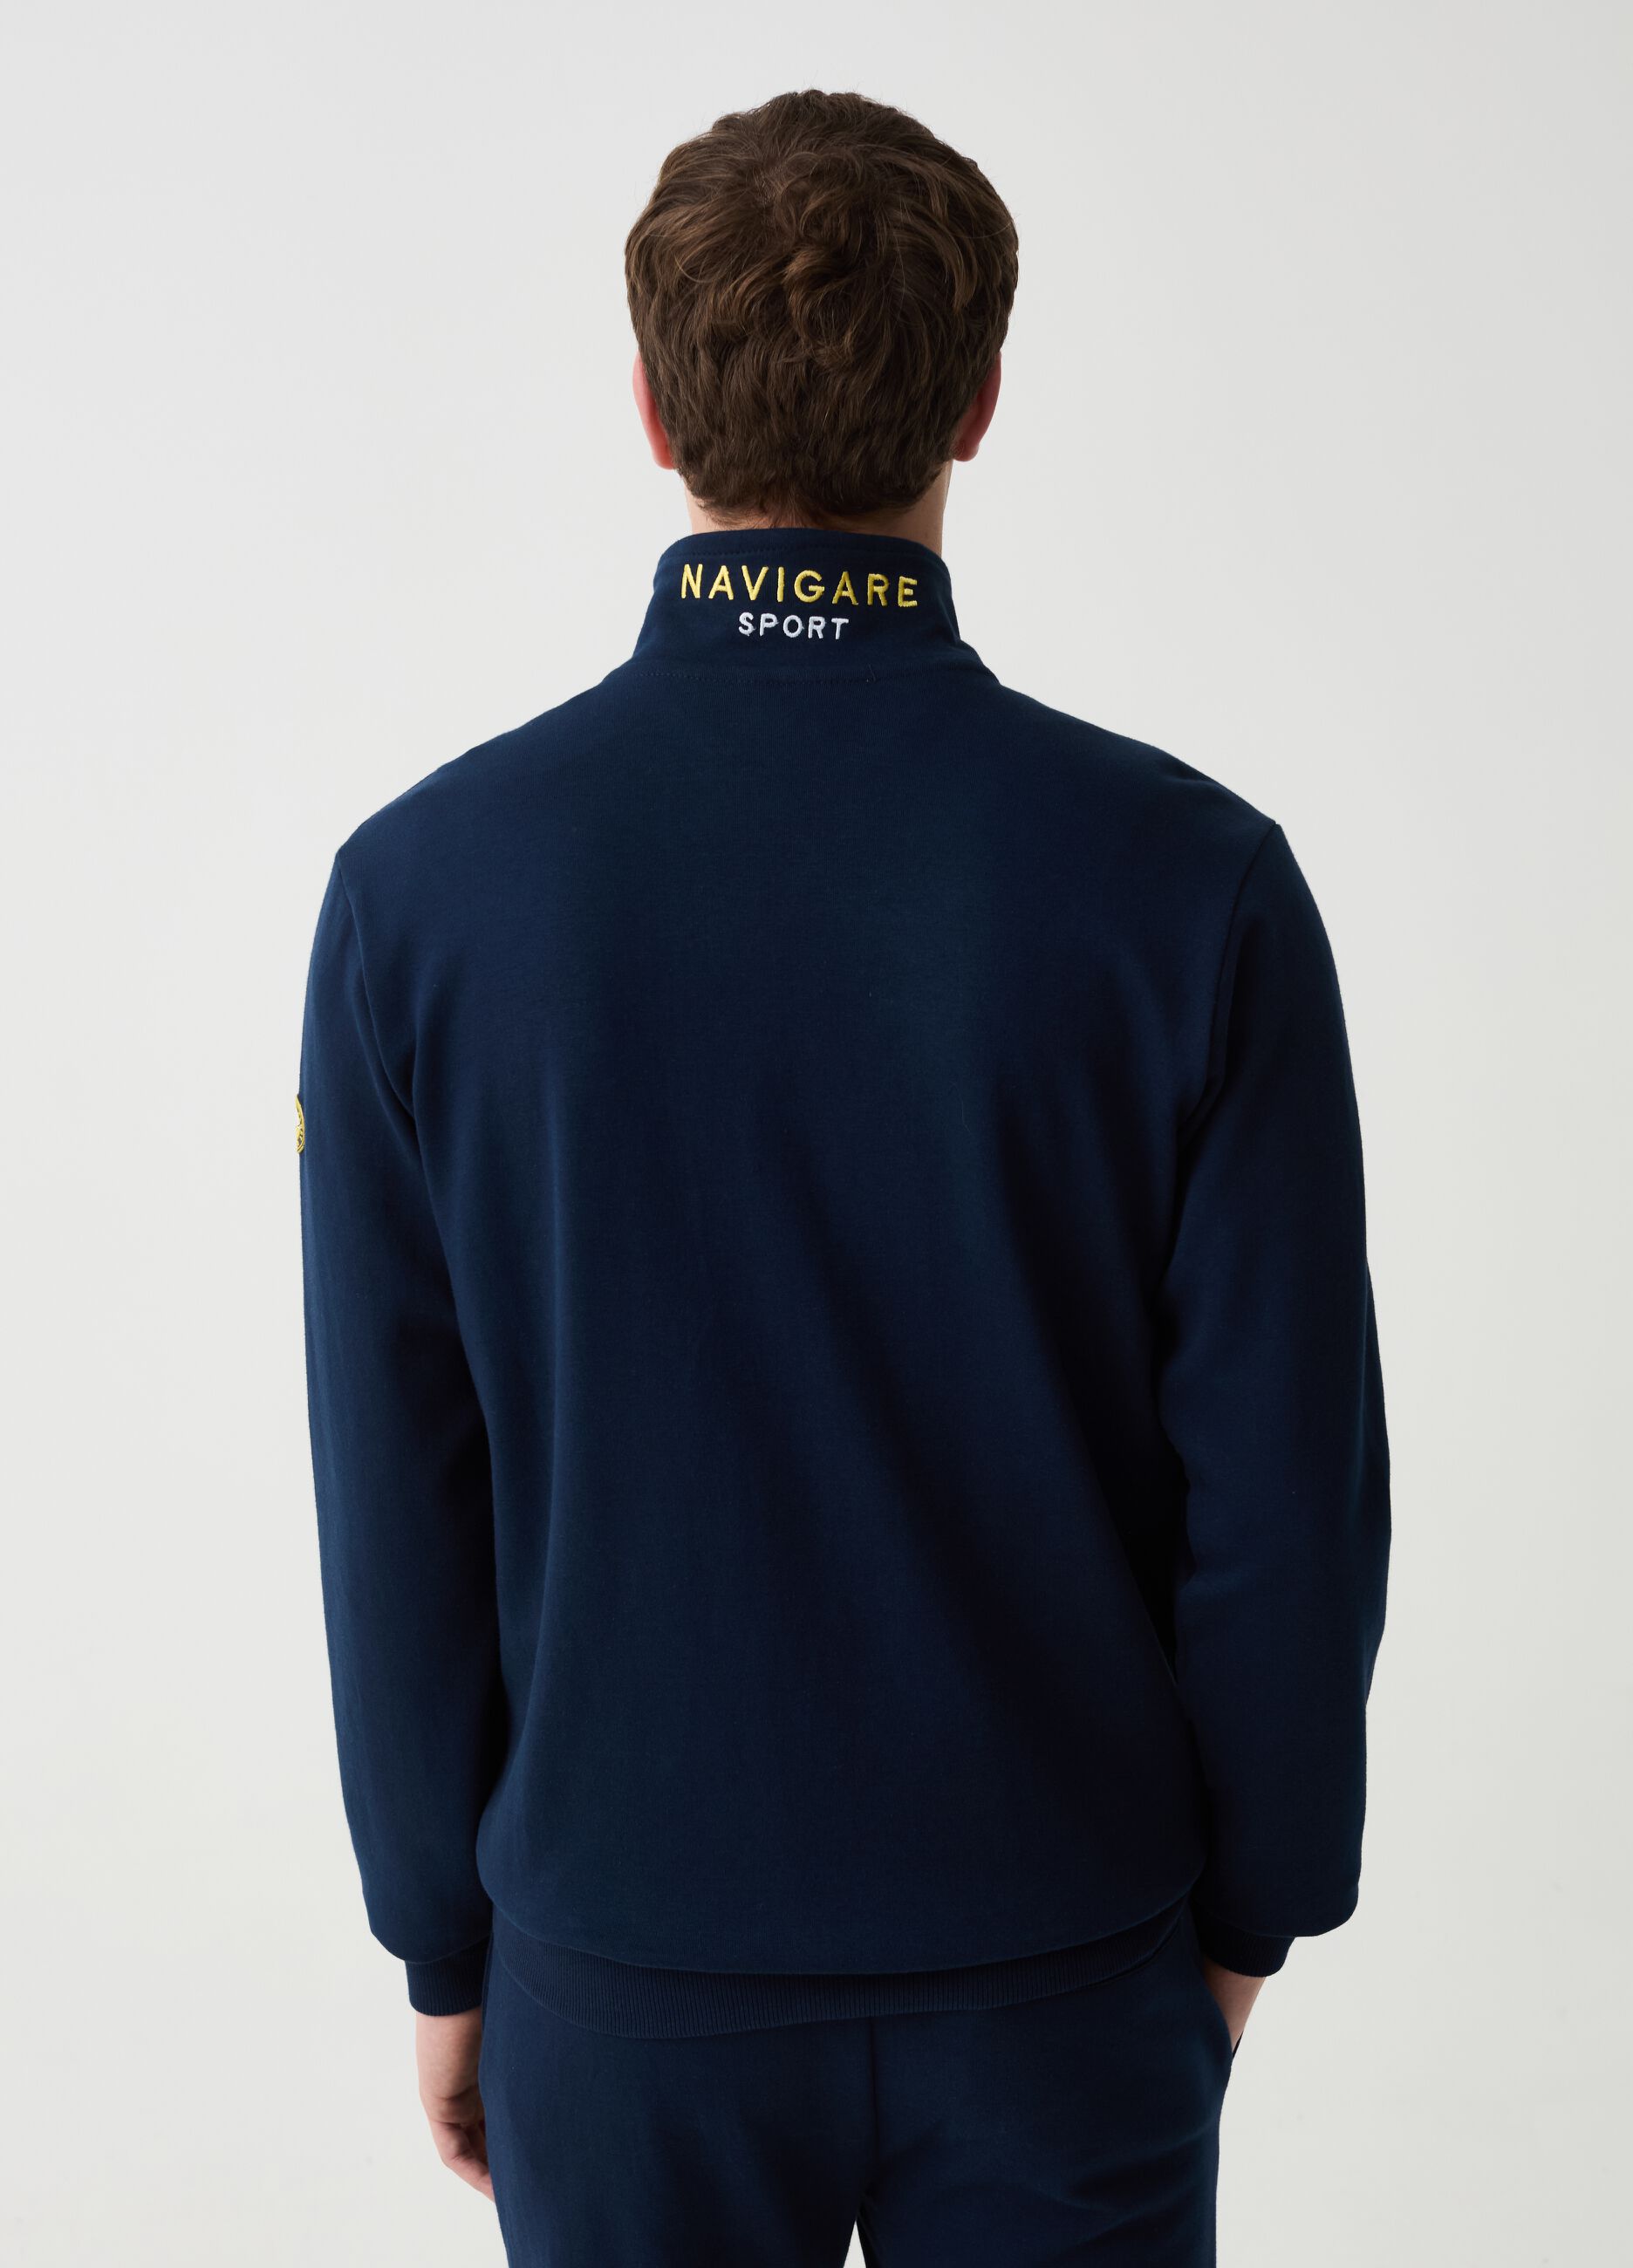 High neck, full-zip with Navigare Sport embroidery